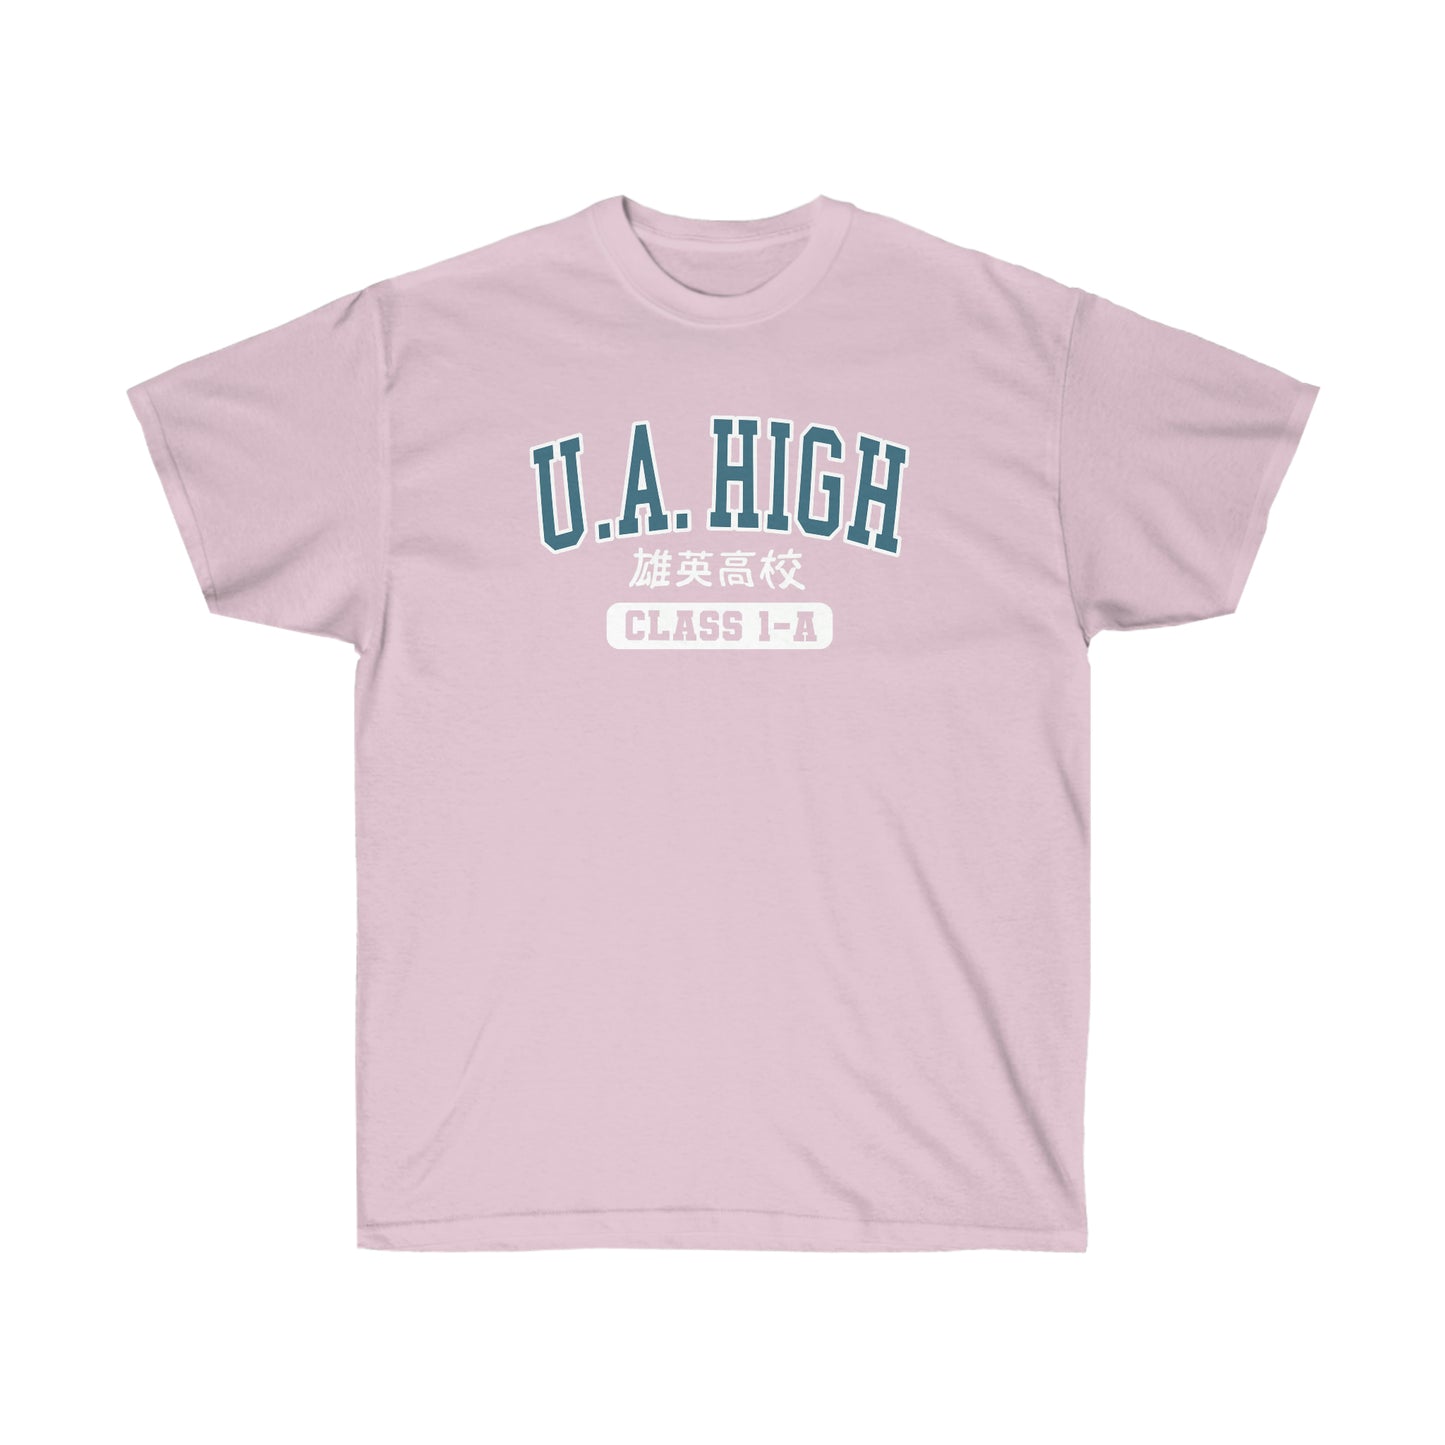 UA High Property of UA Academy t-shirt Japan anime tee gifts for her gifts for him fan